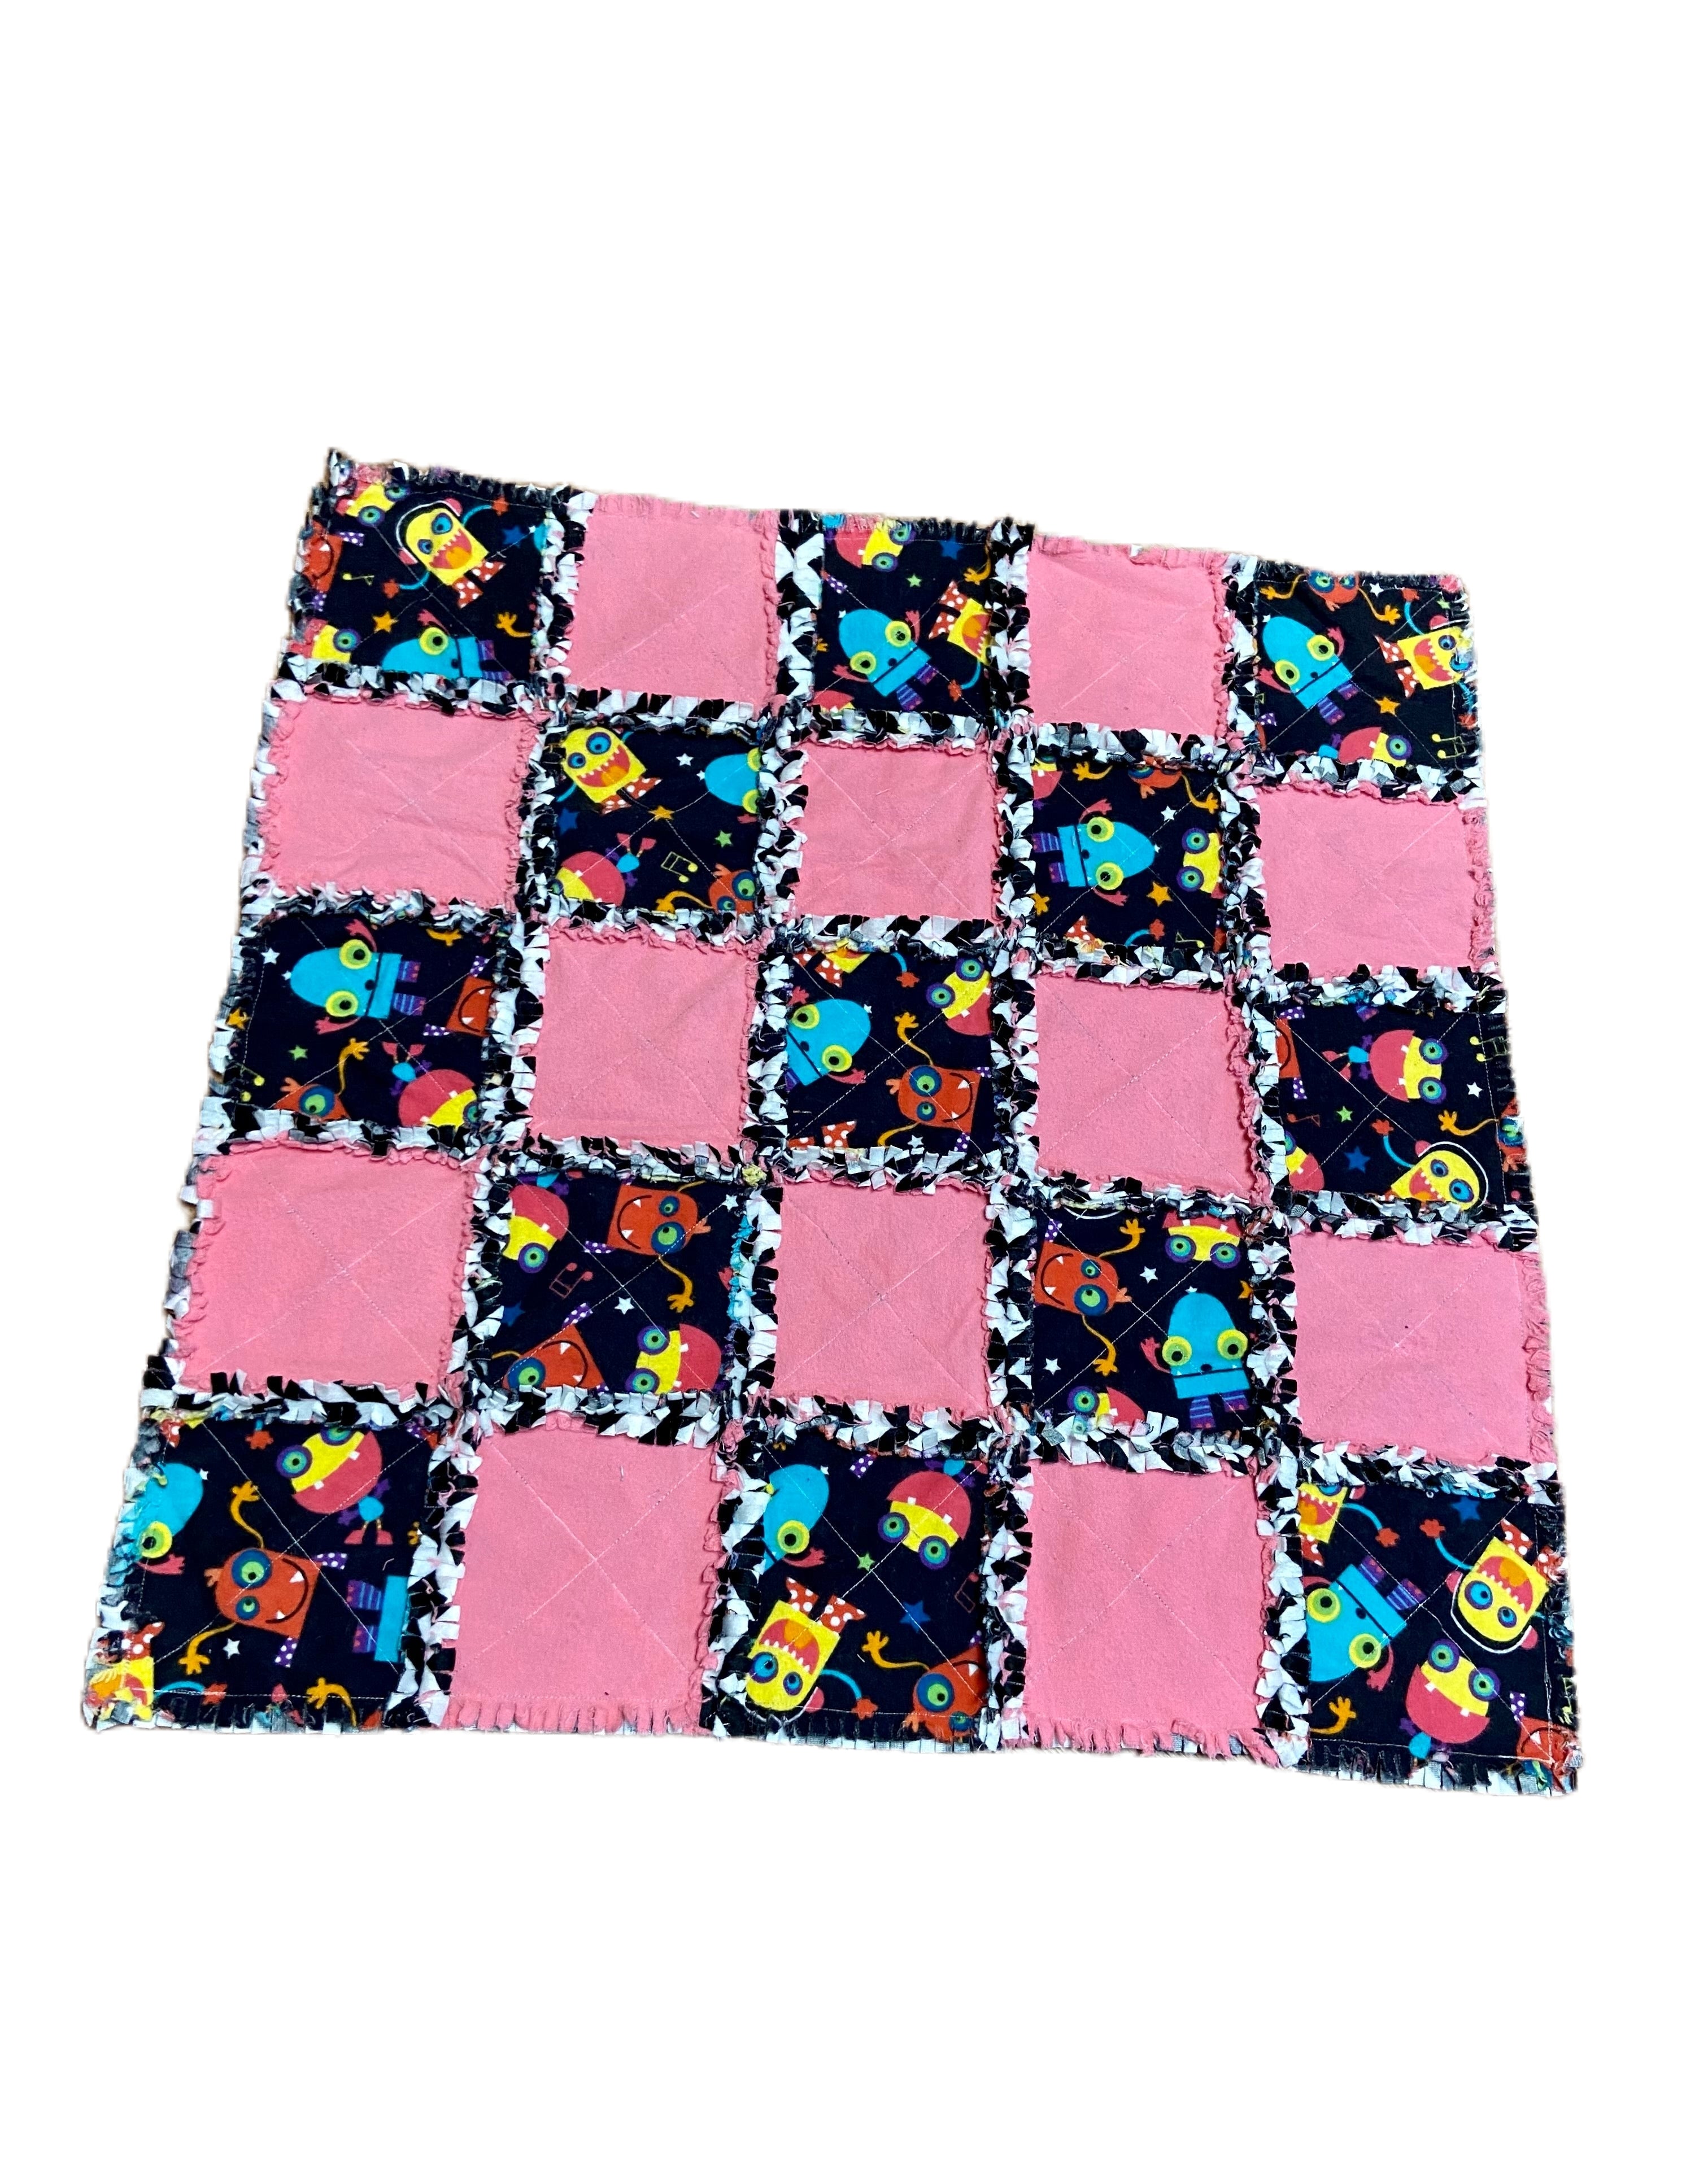 Monster Party Doll Minky Rag Quilt